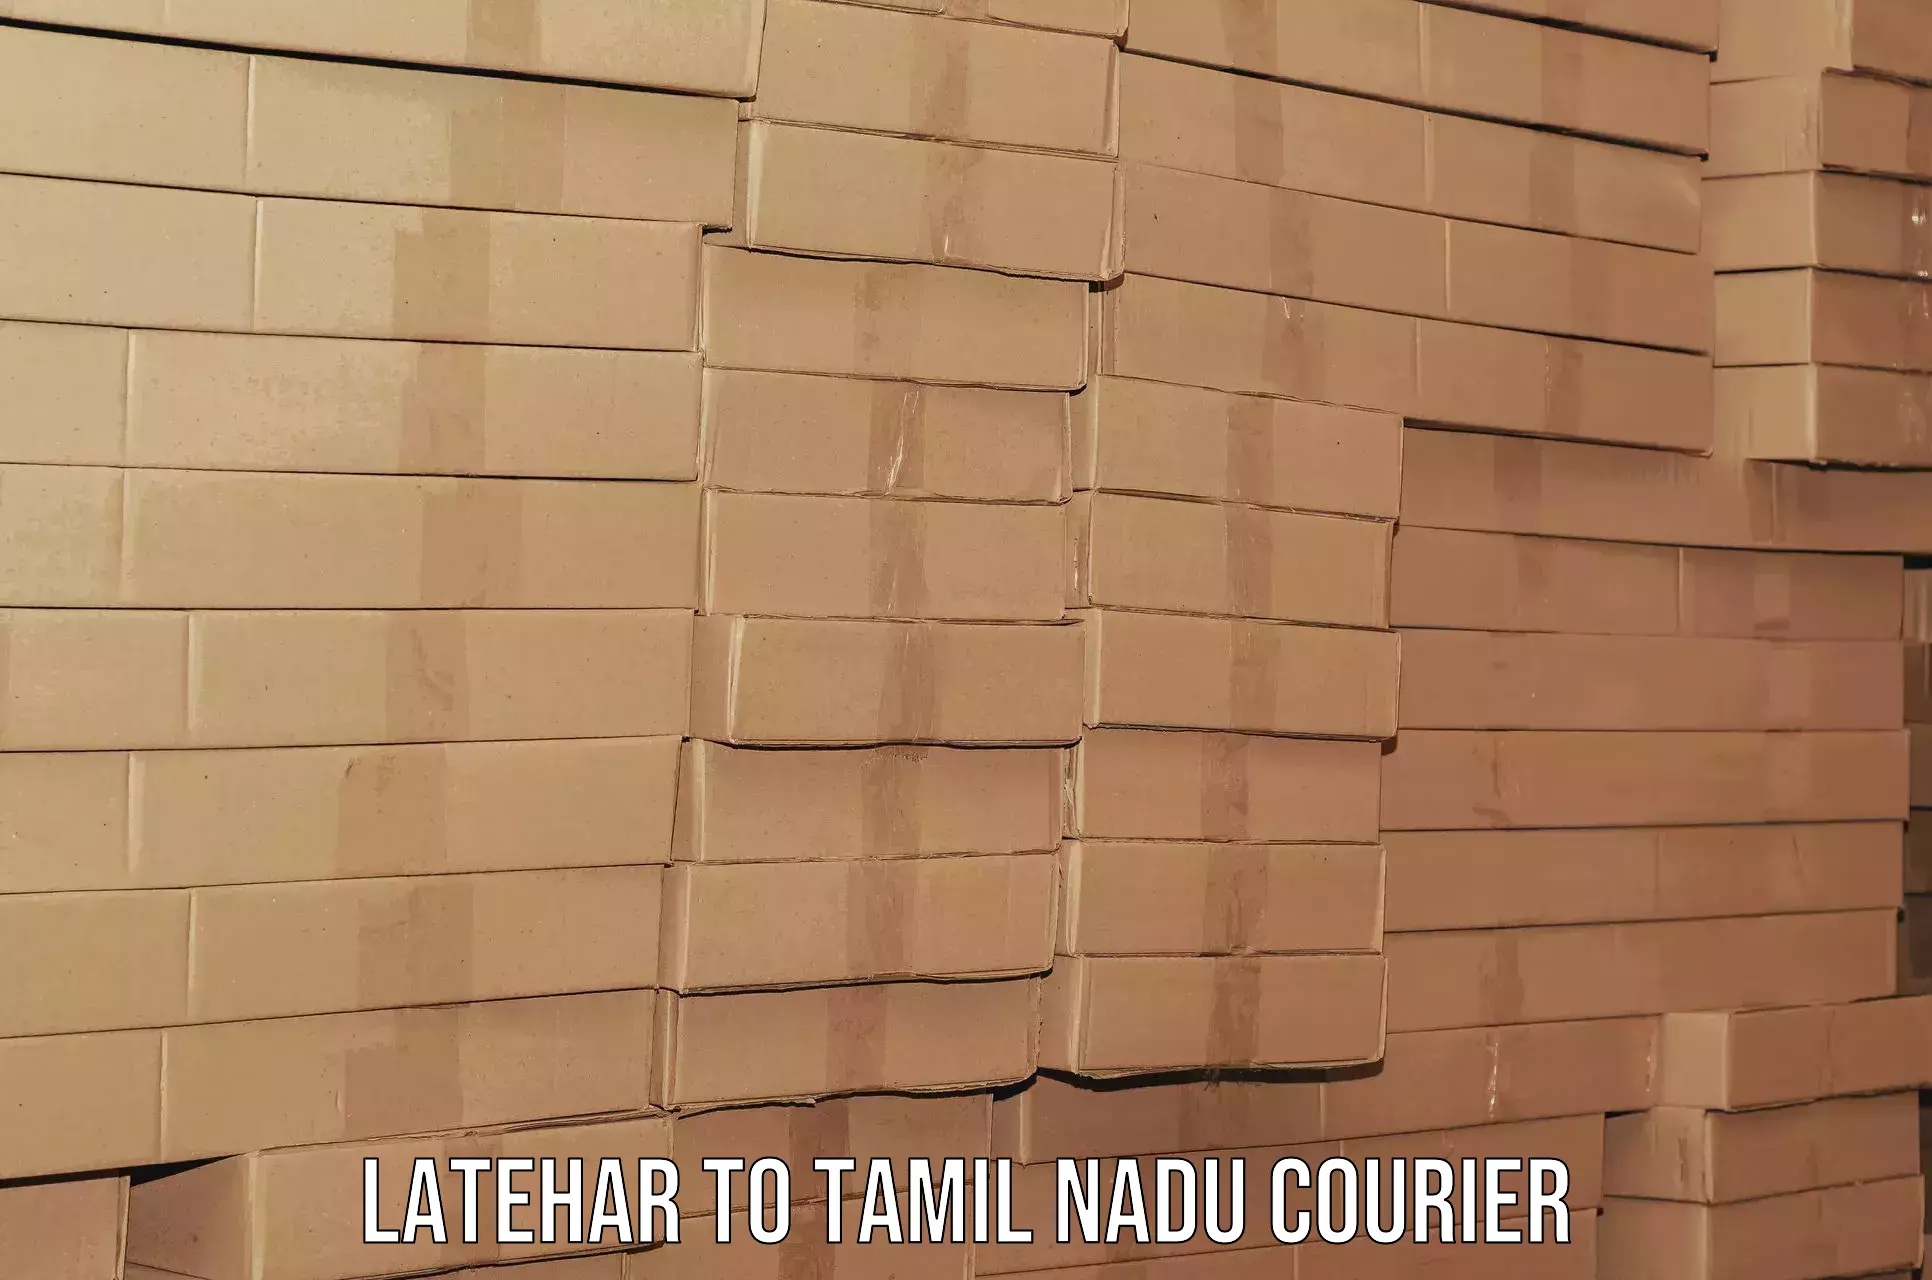 Household moving experts Latehar to Coimbatore